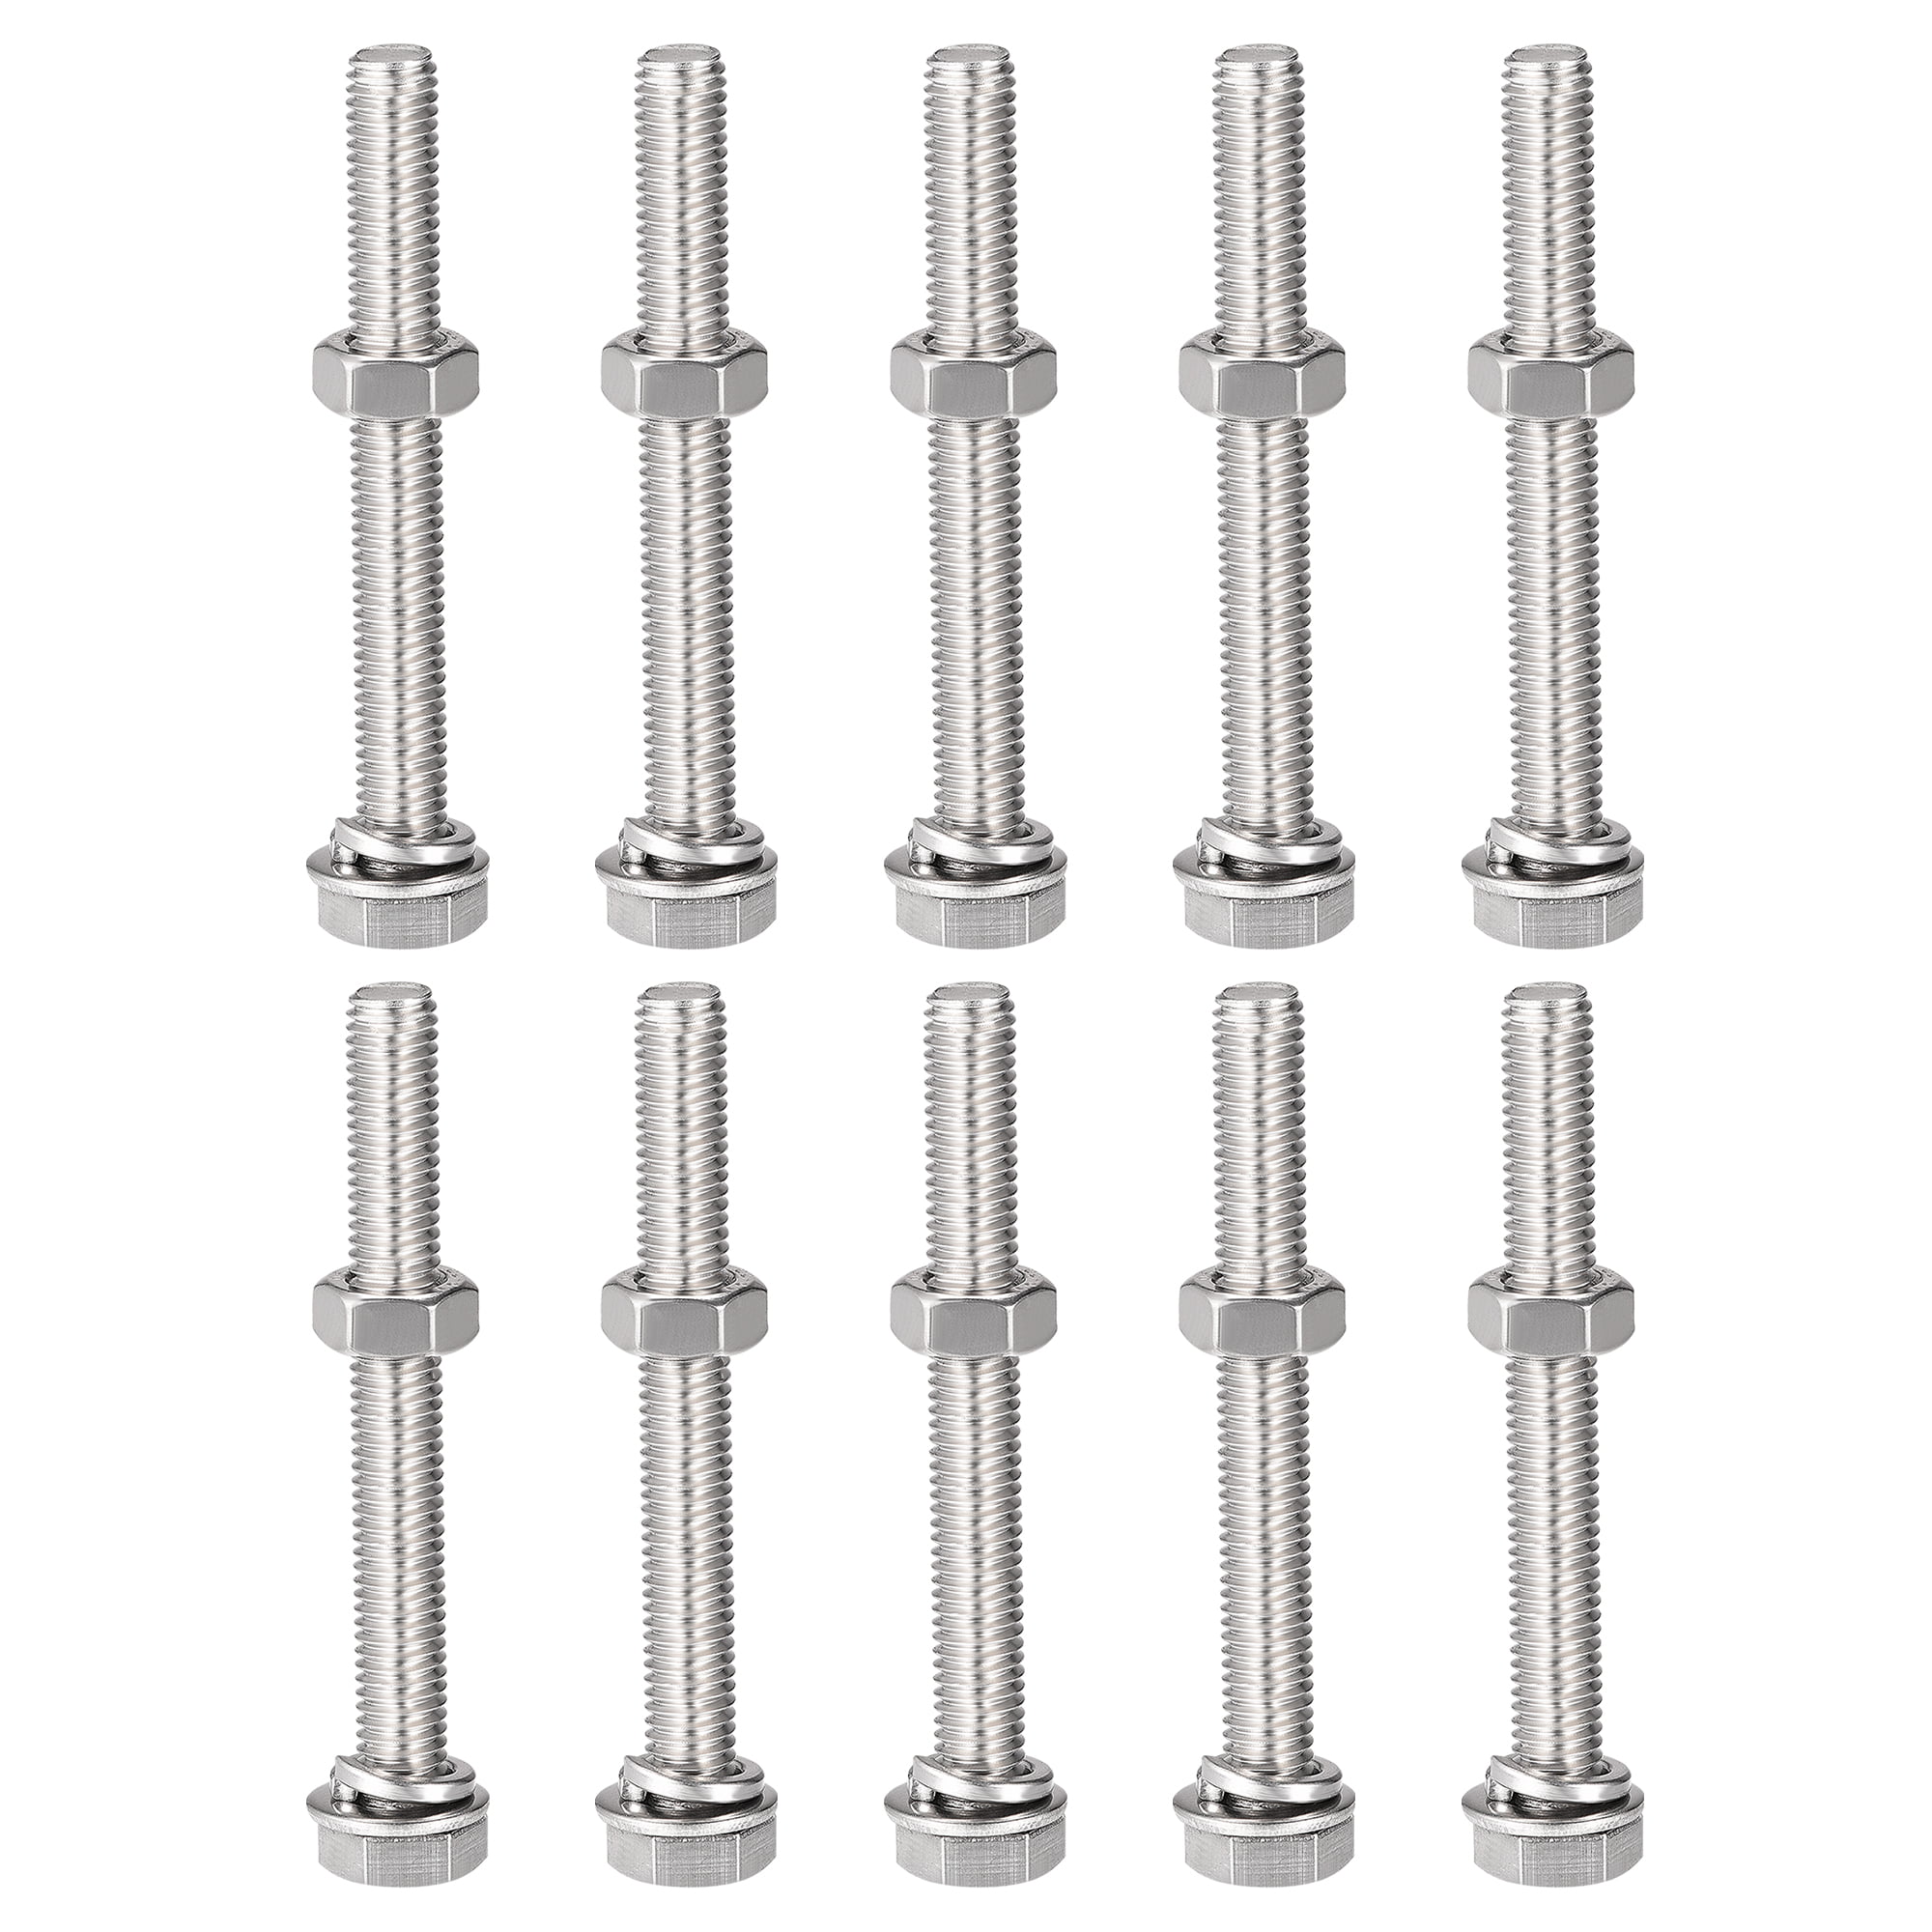 Uxcell M8 x 60mm 304 Stainless Steel Hex Head Screws Bolts, Nuts, Flat   Lock Washers Kits 10 Sets